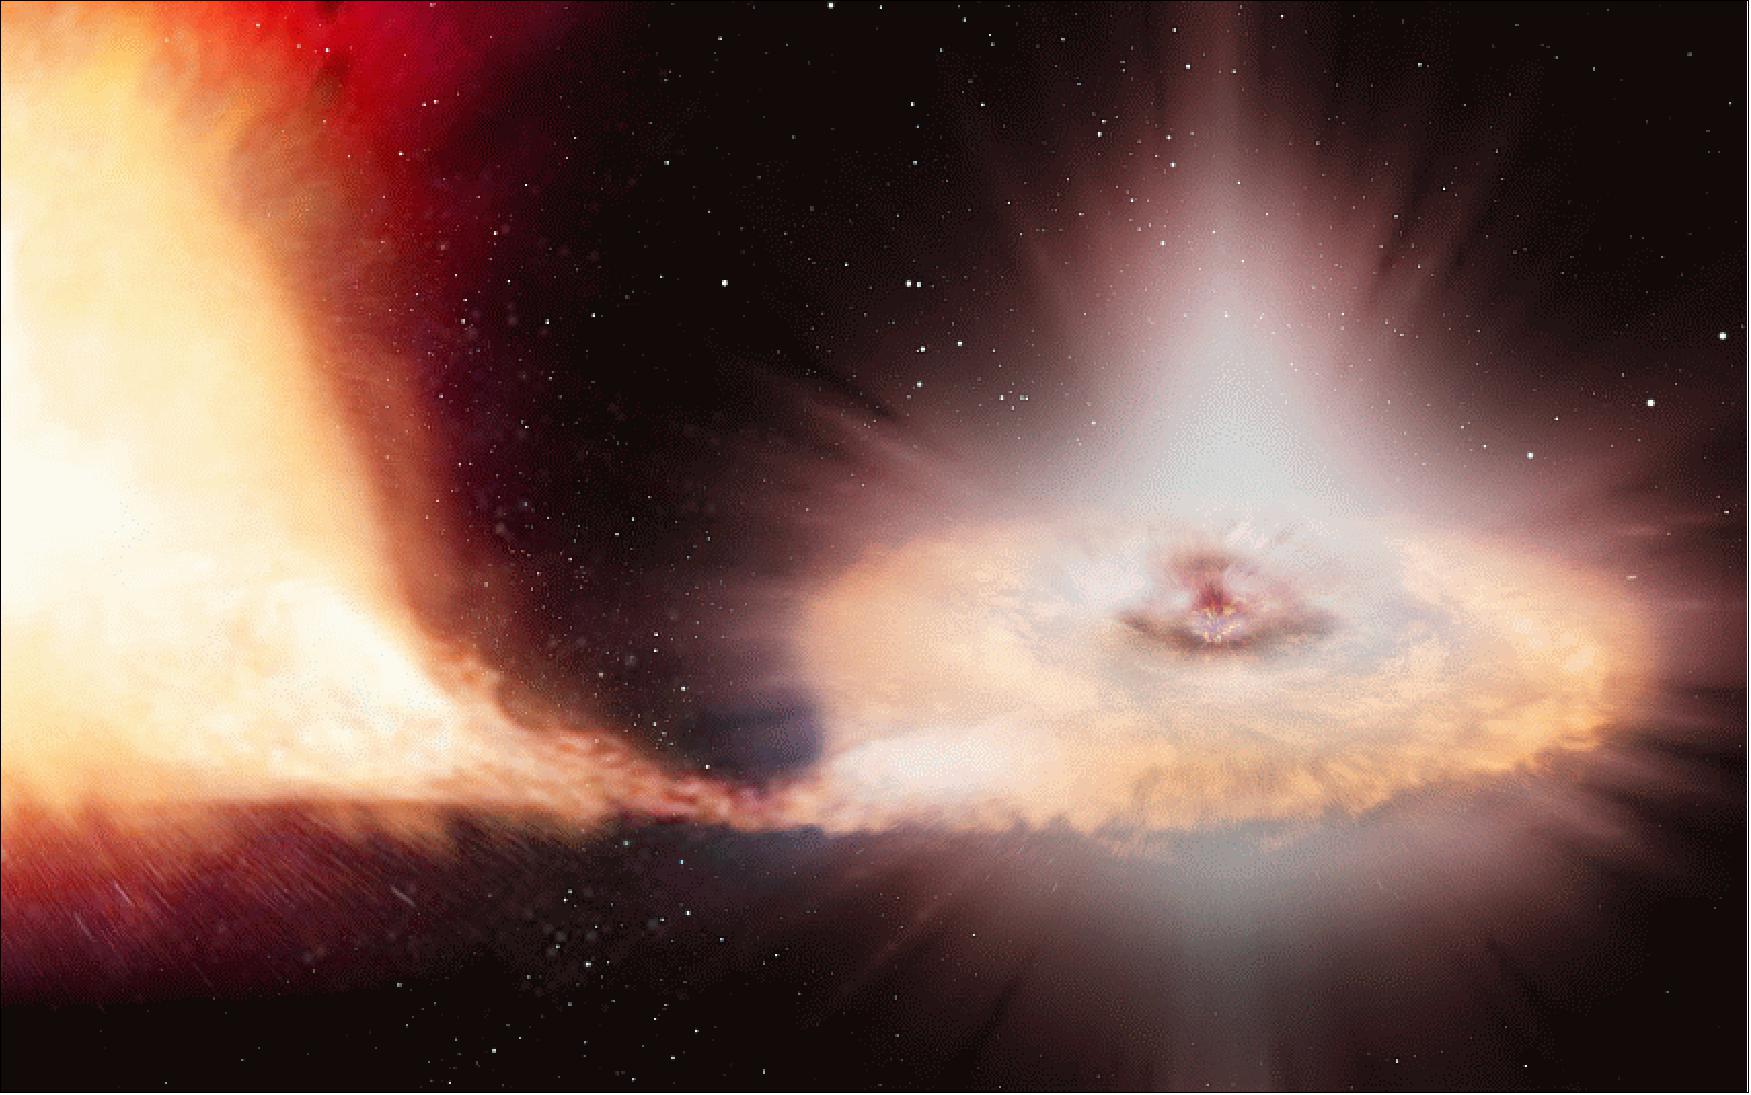 Figure 92: Artist's impression of a Type Ia supernova — the explosion of a white dwarf locked in a binary system with a companion star (image credit: ESA, ATG medialab, C. Carreau)